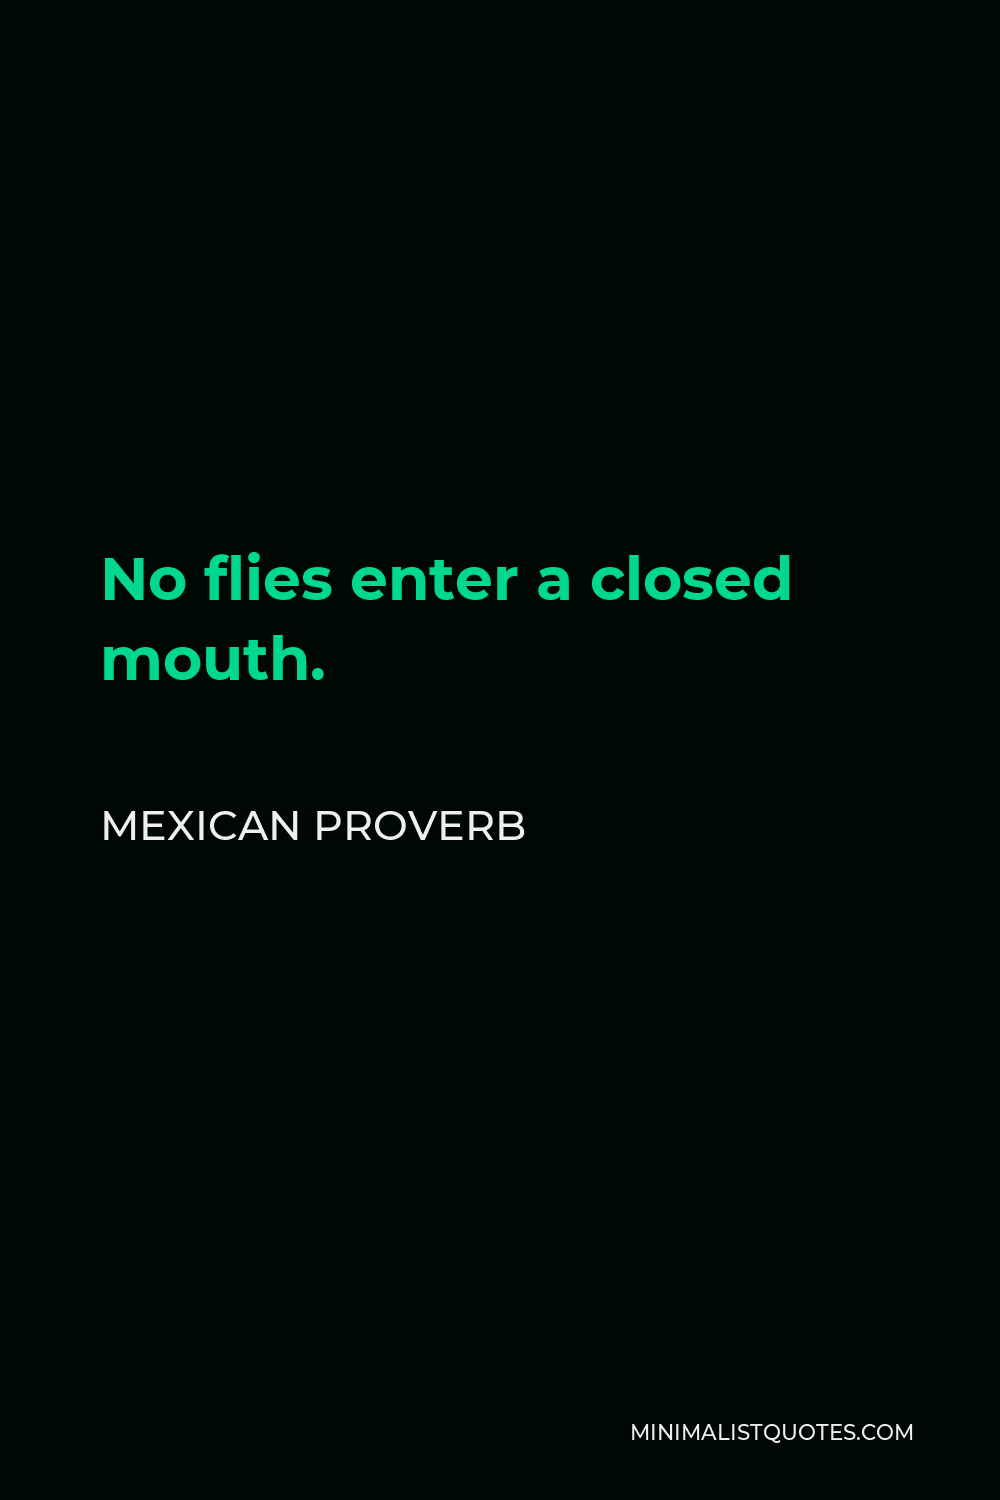 Mexican Proverb Quote - No flies enter a closed mouth.